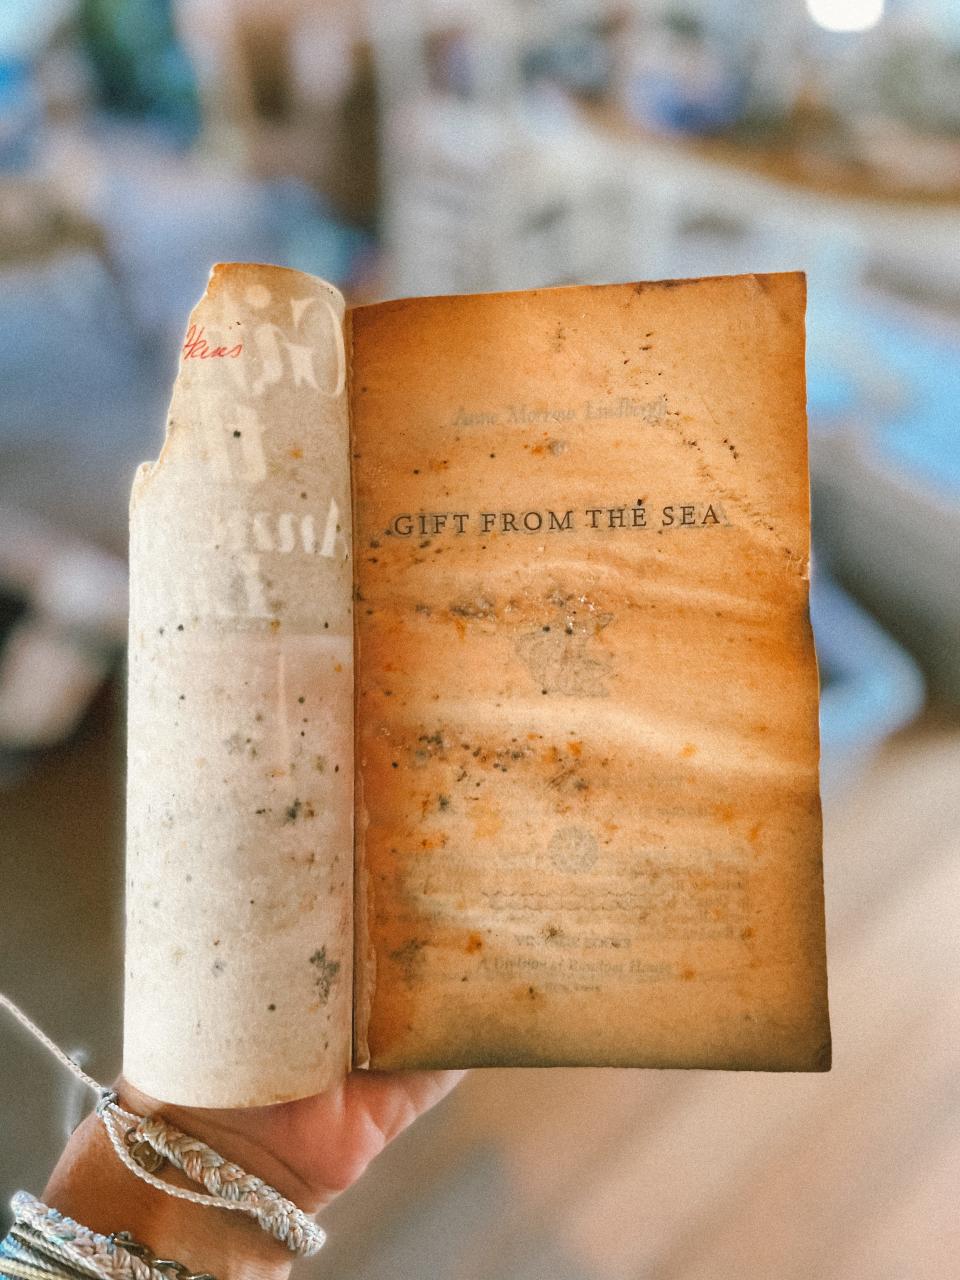 When Hurricane Ian flooded their home on Sept. 28, 2022, Stefanie and Steve Plein lost numerous possessions, including this book, "Gift from the Sea", from their collection. "Gift from the Sea" was written in 1955 and is a work of inspirational nonfiction literature by American author Anne Morrow Lindbergh. While vacationing on Captiva Island, Florida, Lindbergh explores the questions of how to find a new, more natural rhythm of life and how to gain a deeper relationship with herself and others.